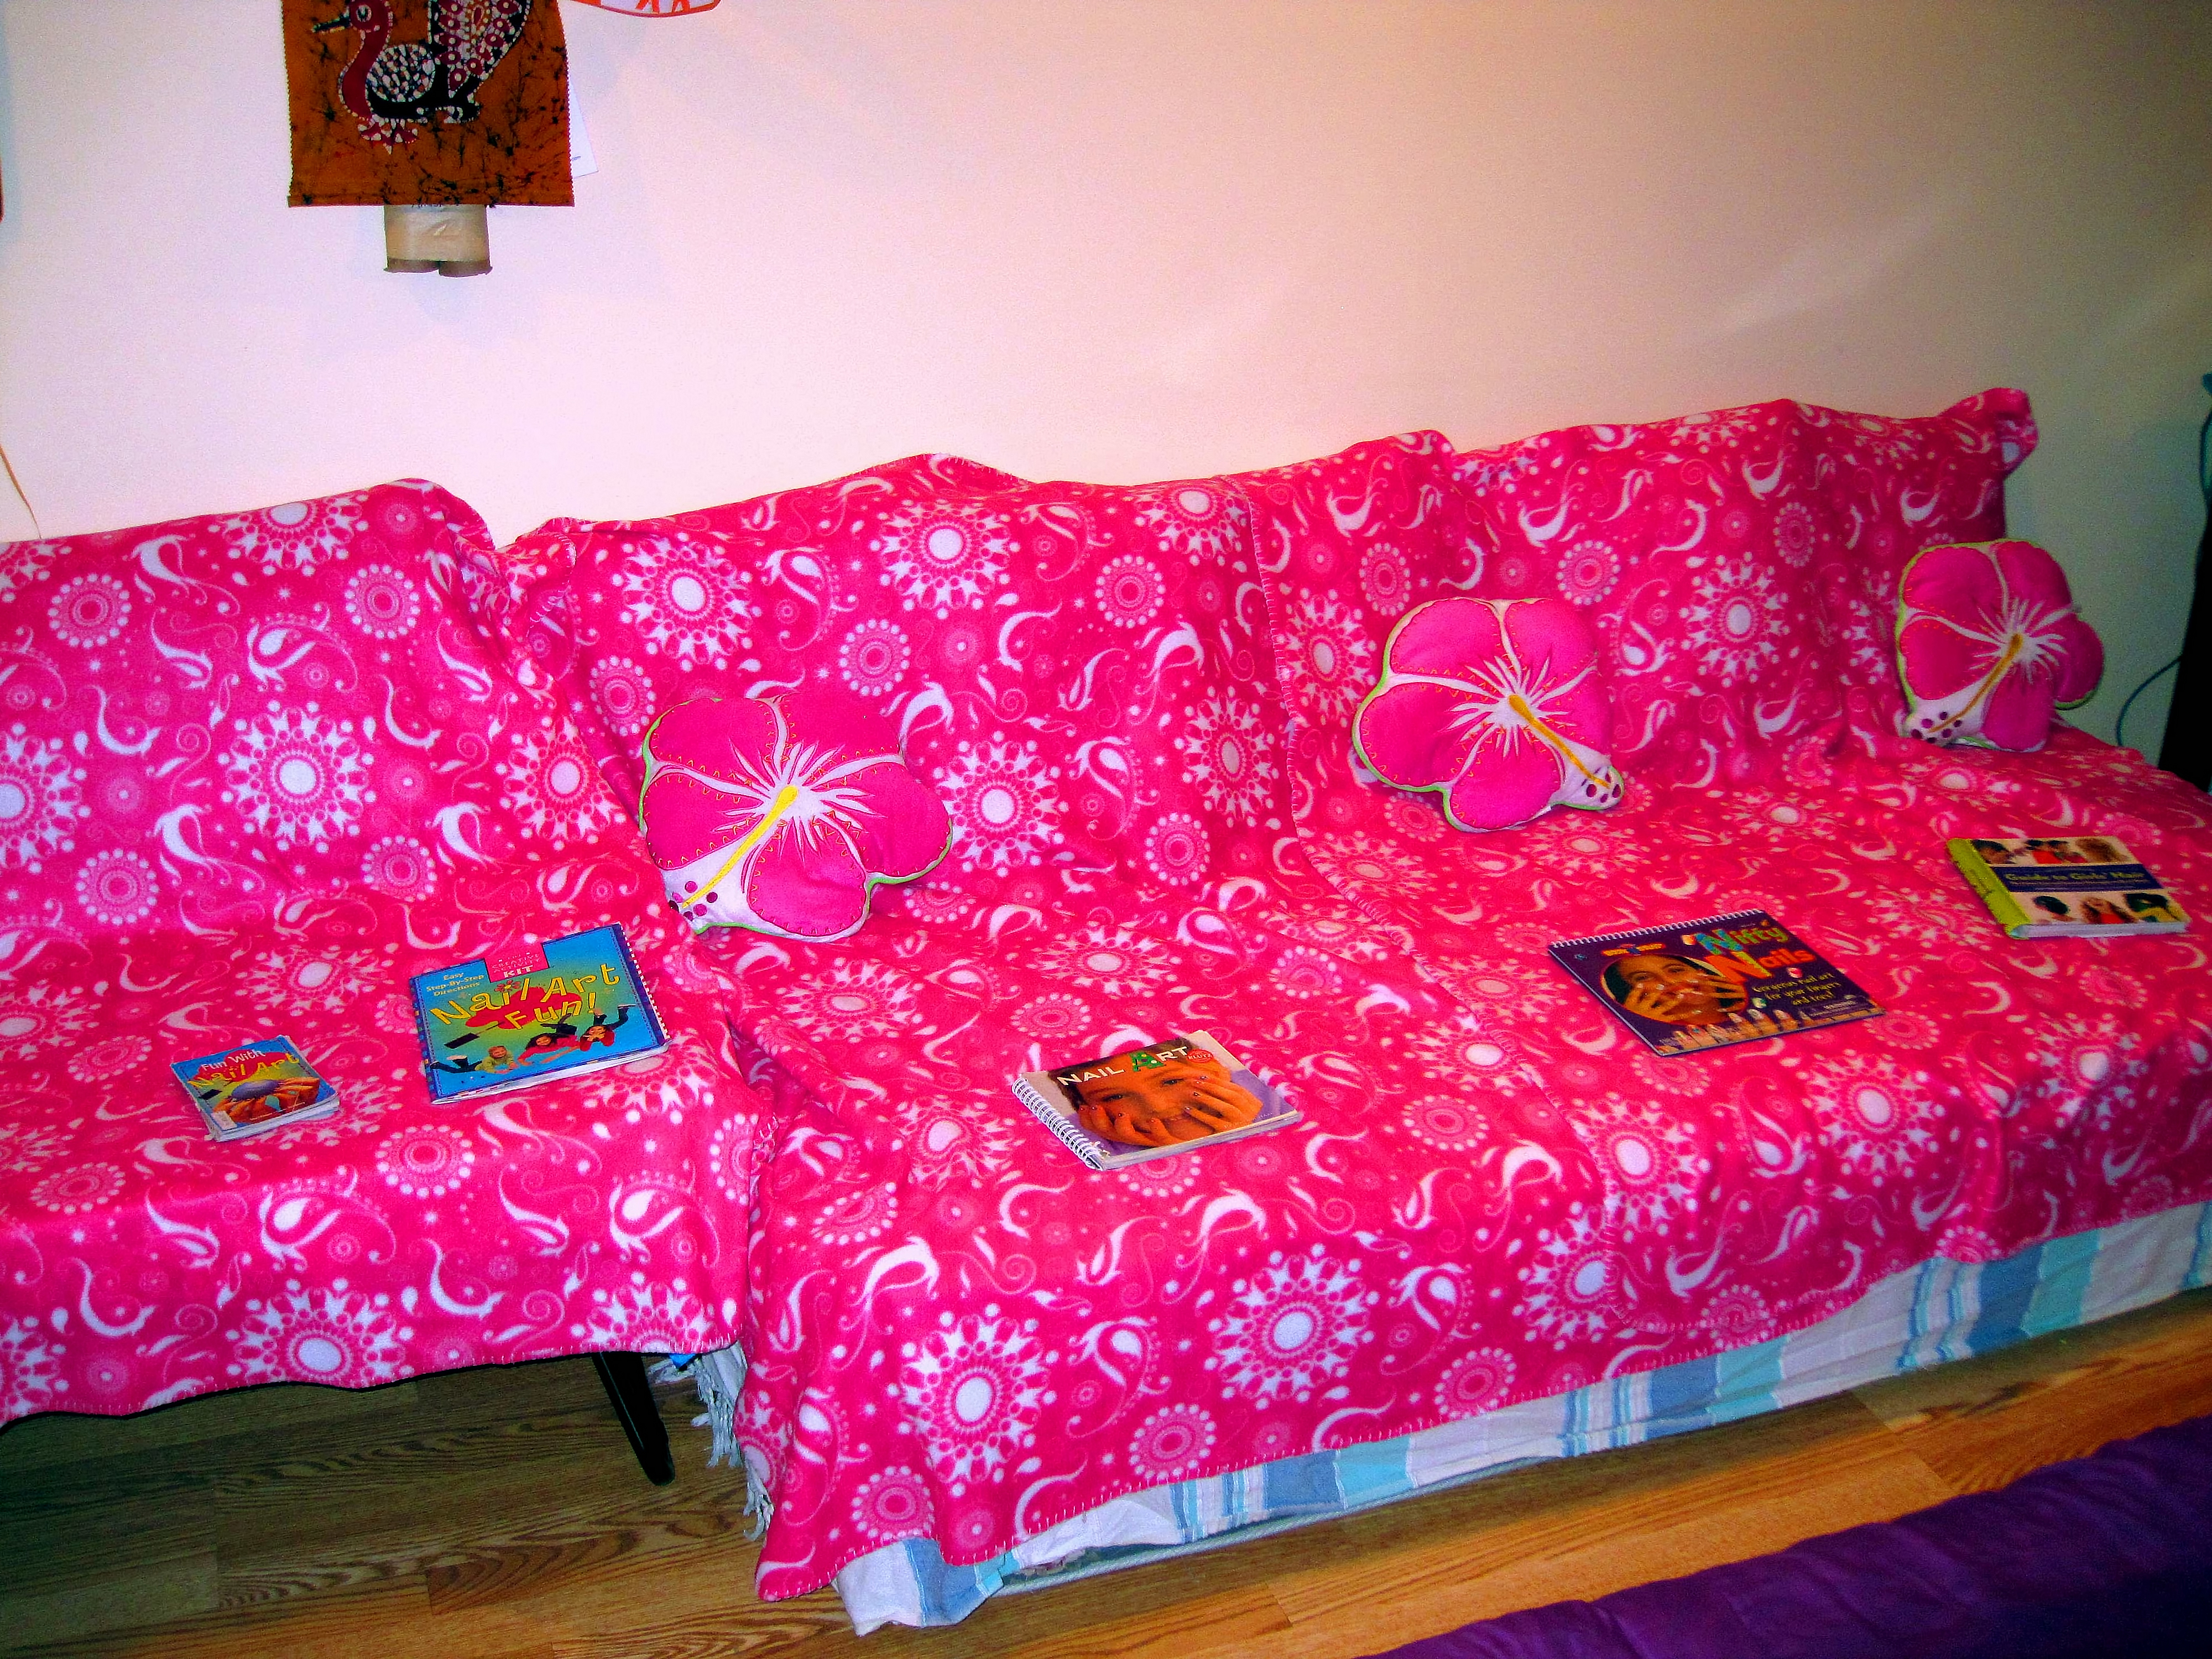 Manicure Nail Design Books On The Spa Couch